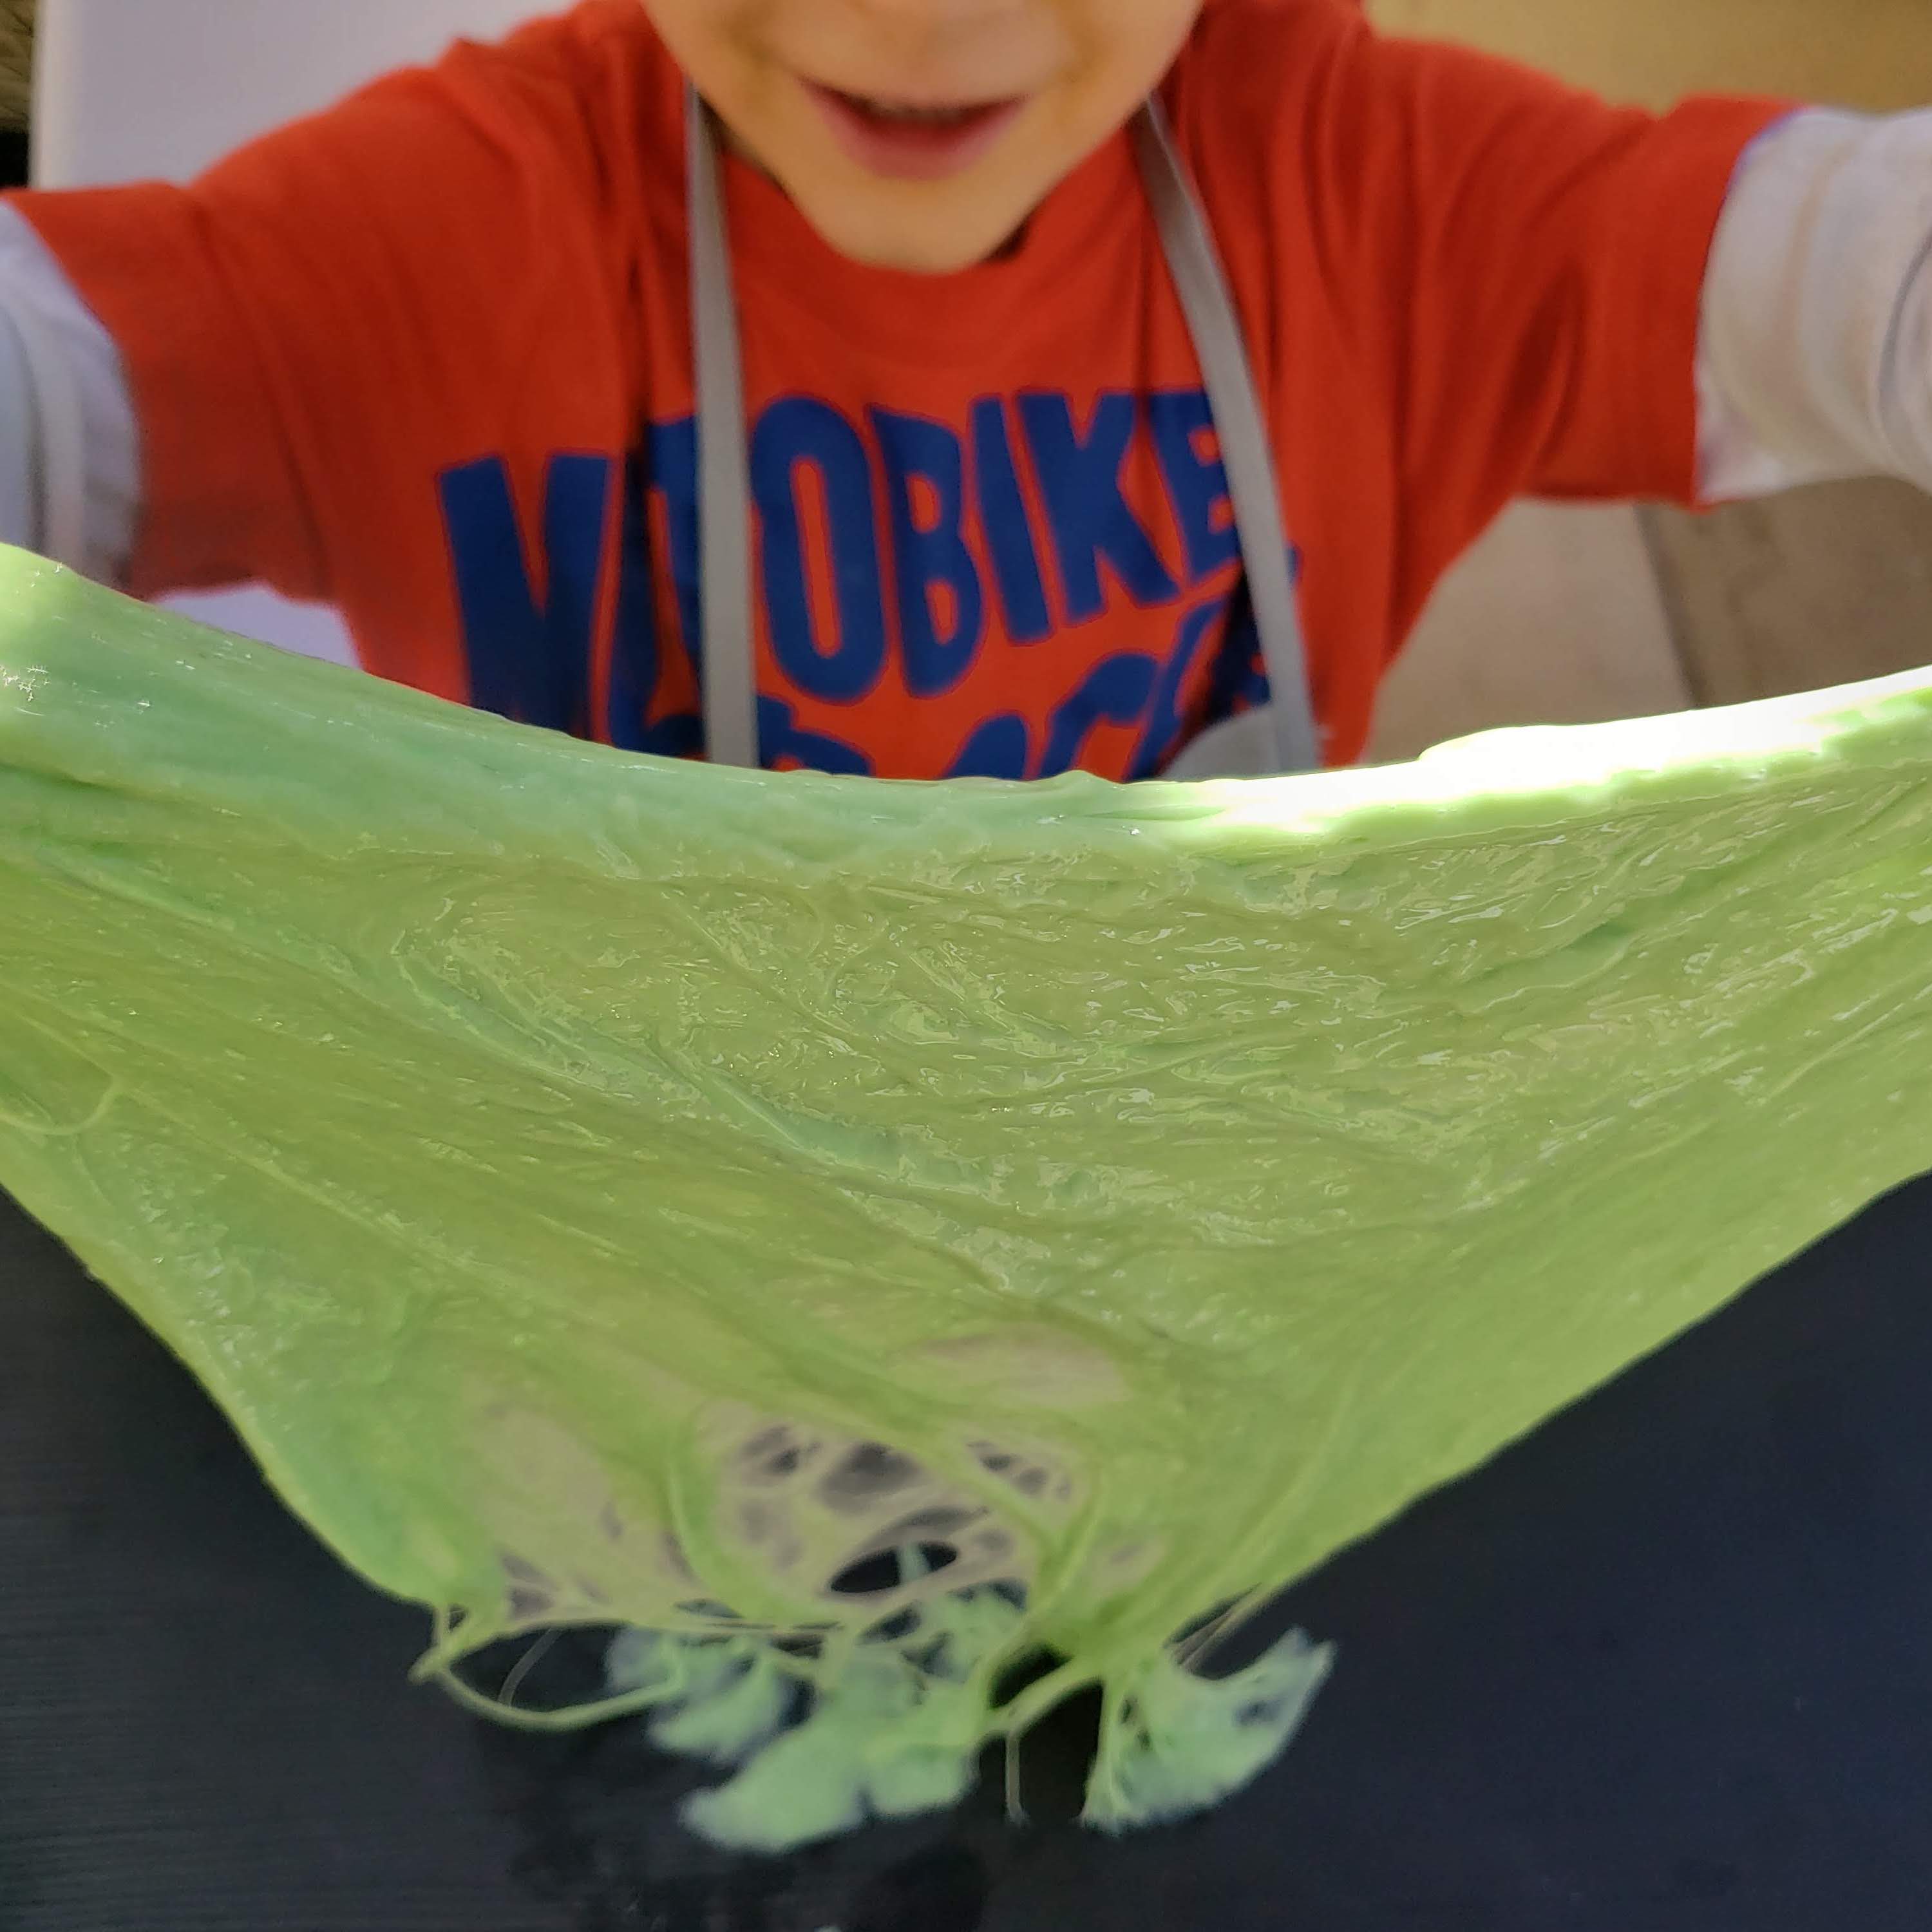 This homemade slime will provide hours of entertainment and experimentation.